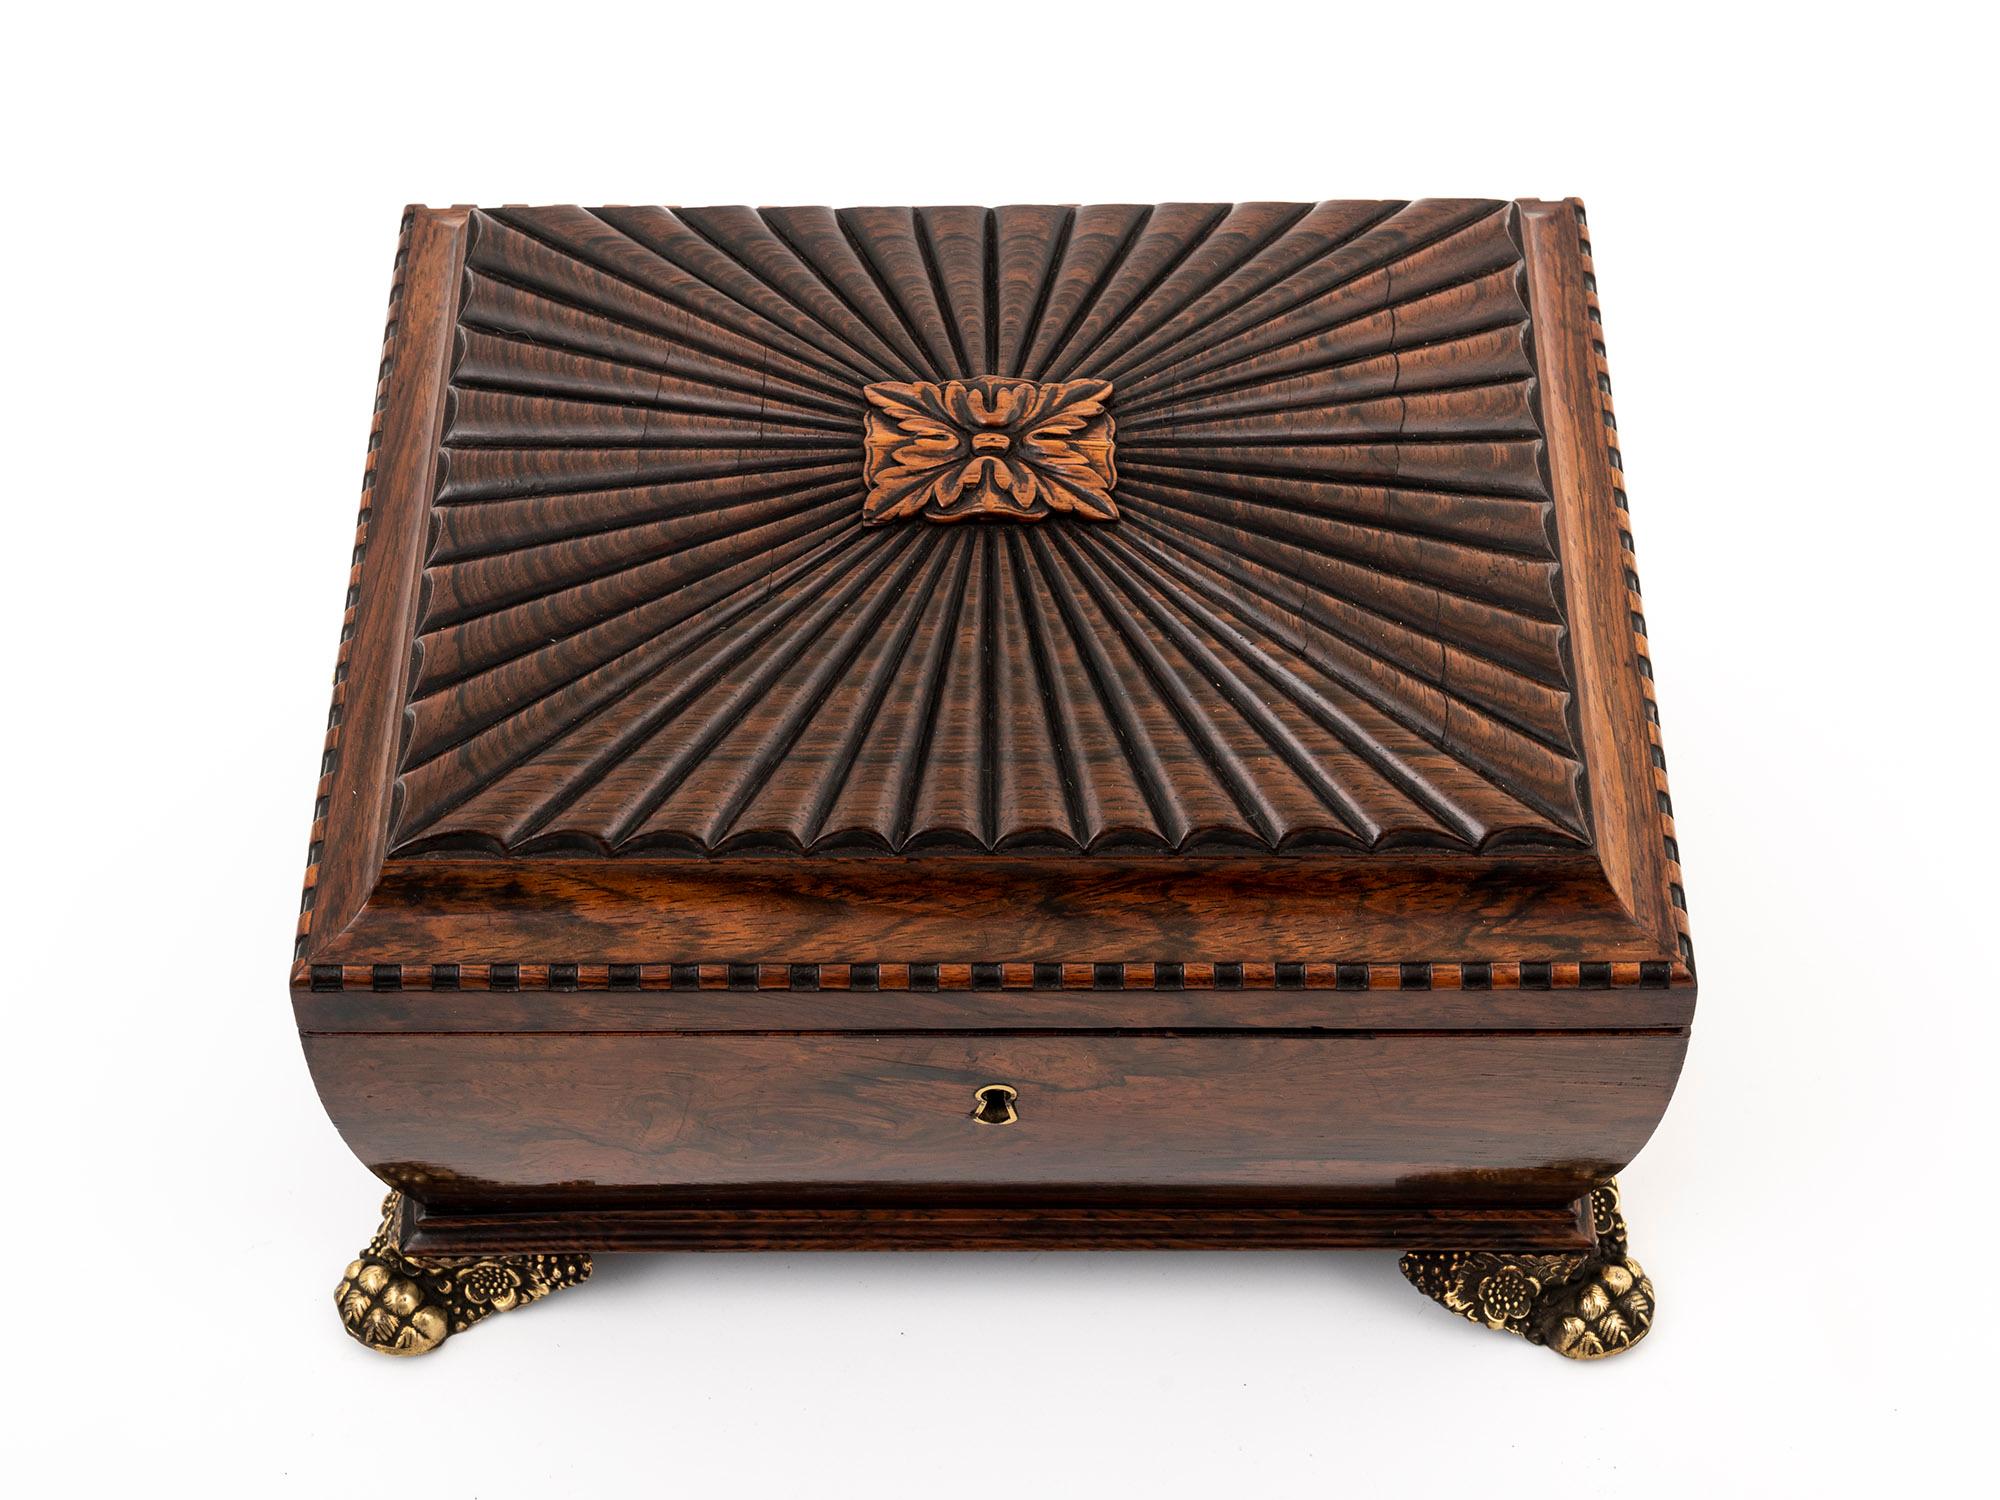 Regency Antique Rosewood Jewellery Box with Sarcophagus Shape and Ornate Brass Details For Sale